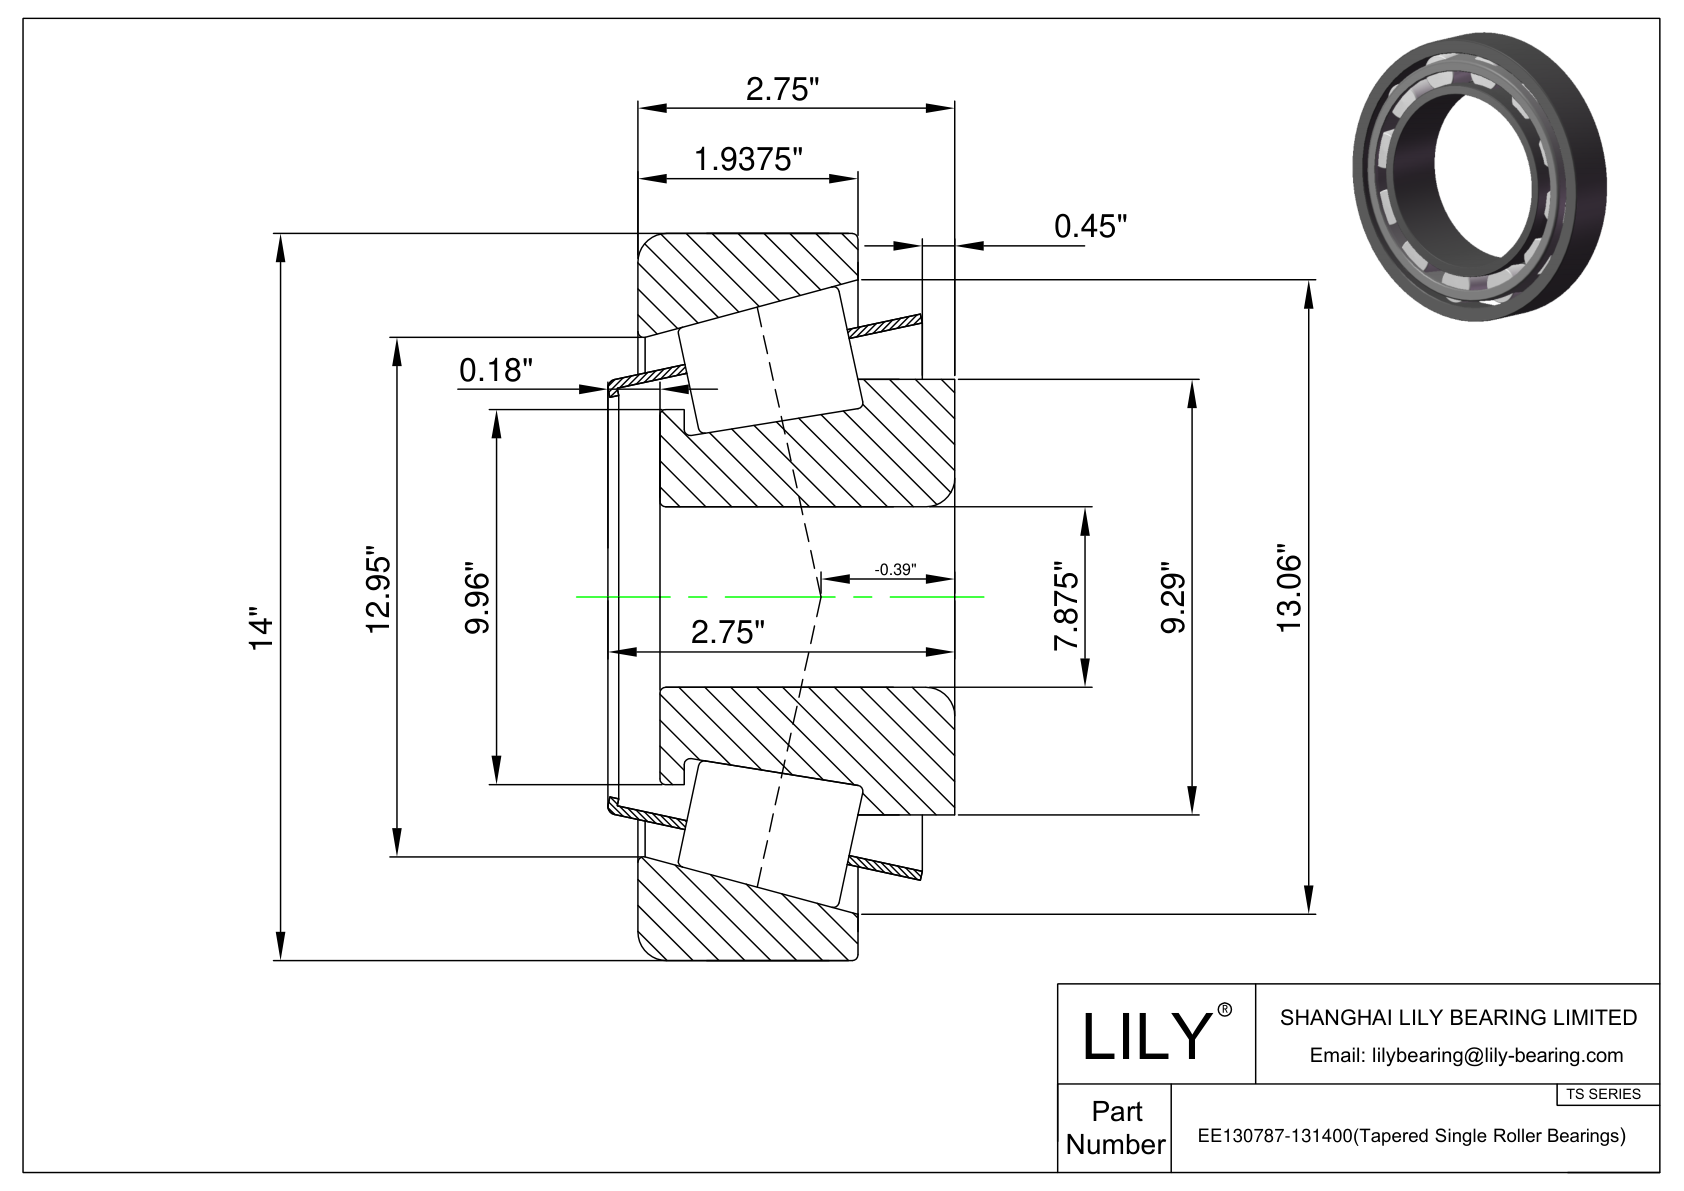 EE130787-131400 TS (Tapered Single Roller Bearings) (Imperial) cad drawing